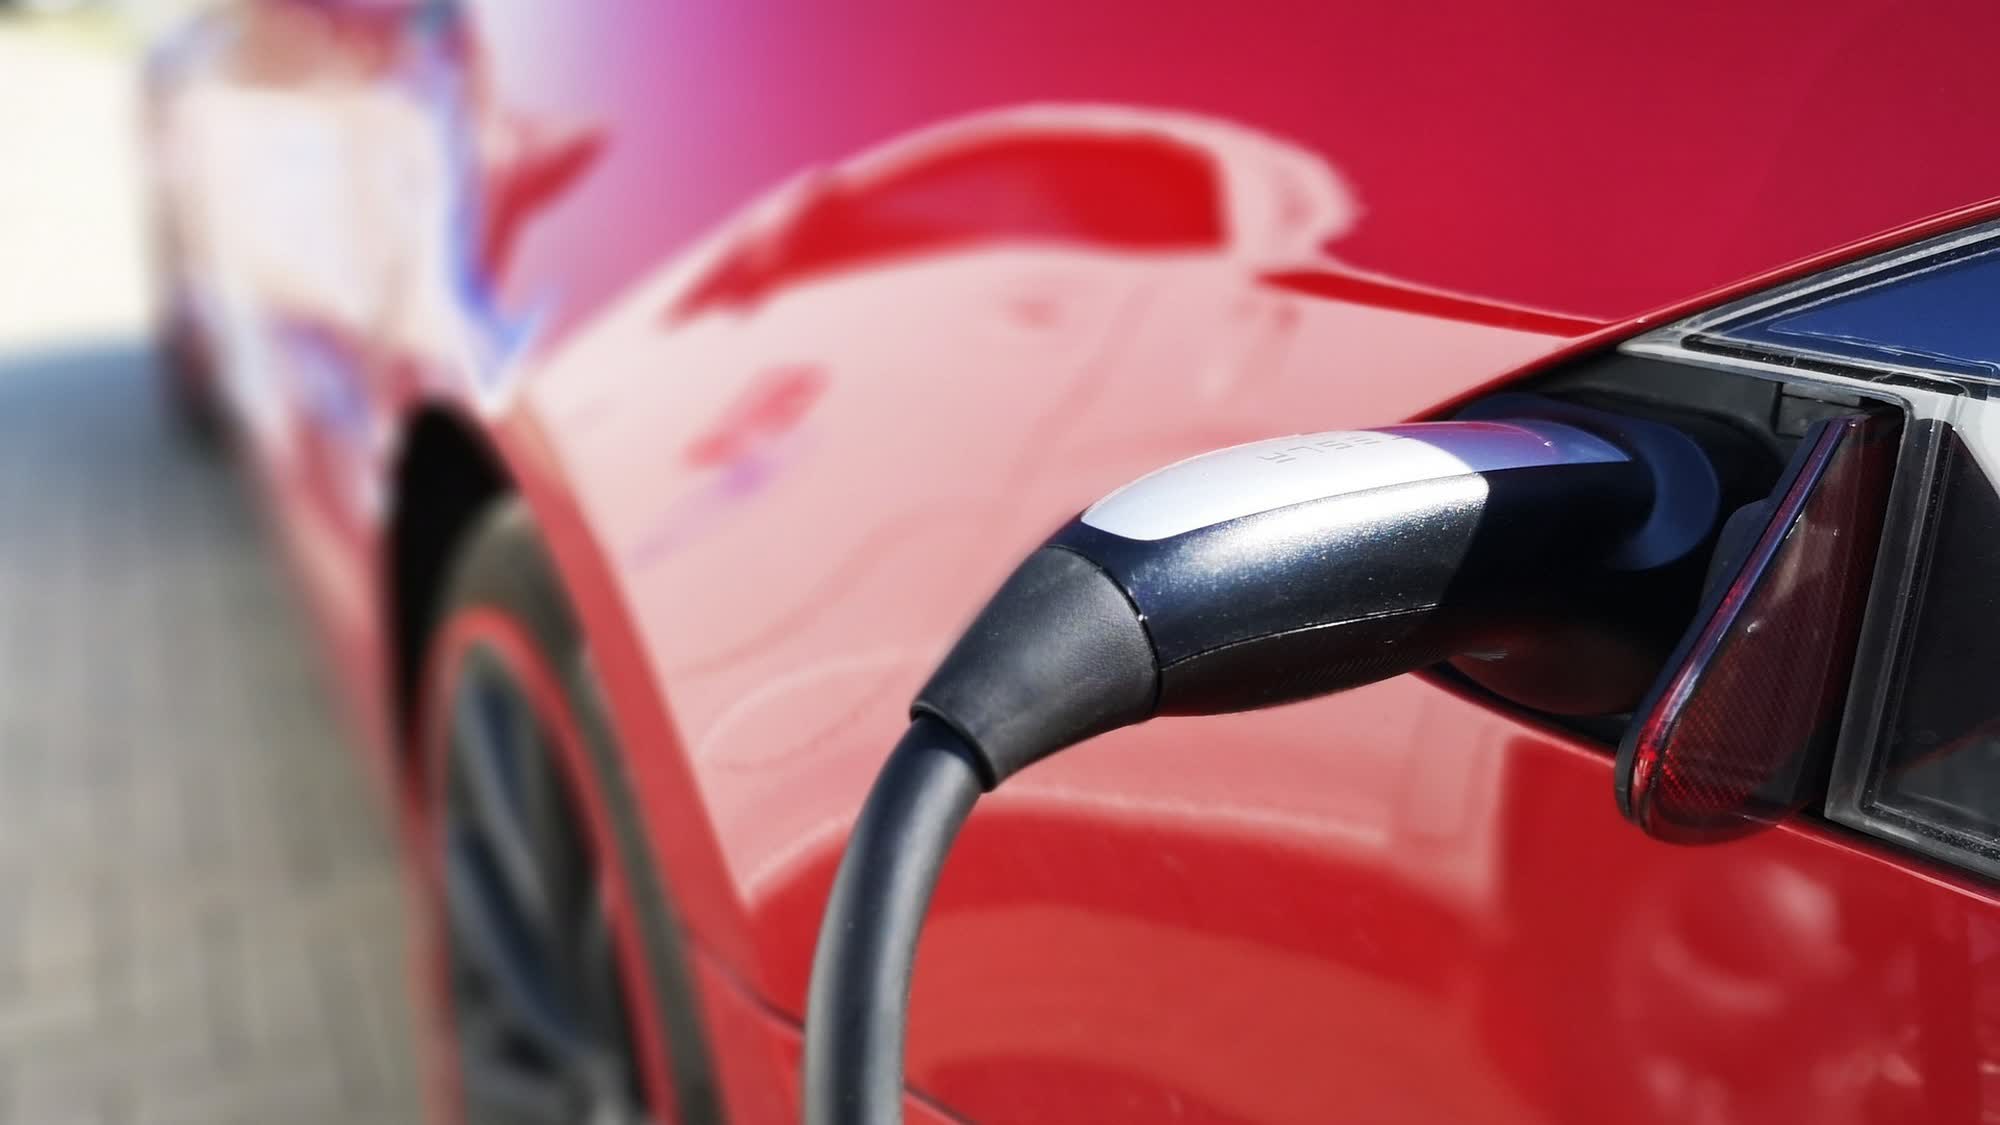 BMW, GM, Honda and other automakers join hands for new EV charging network to rival Tesla